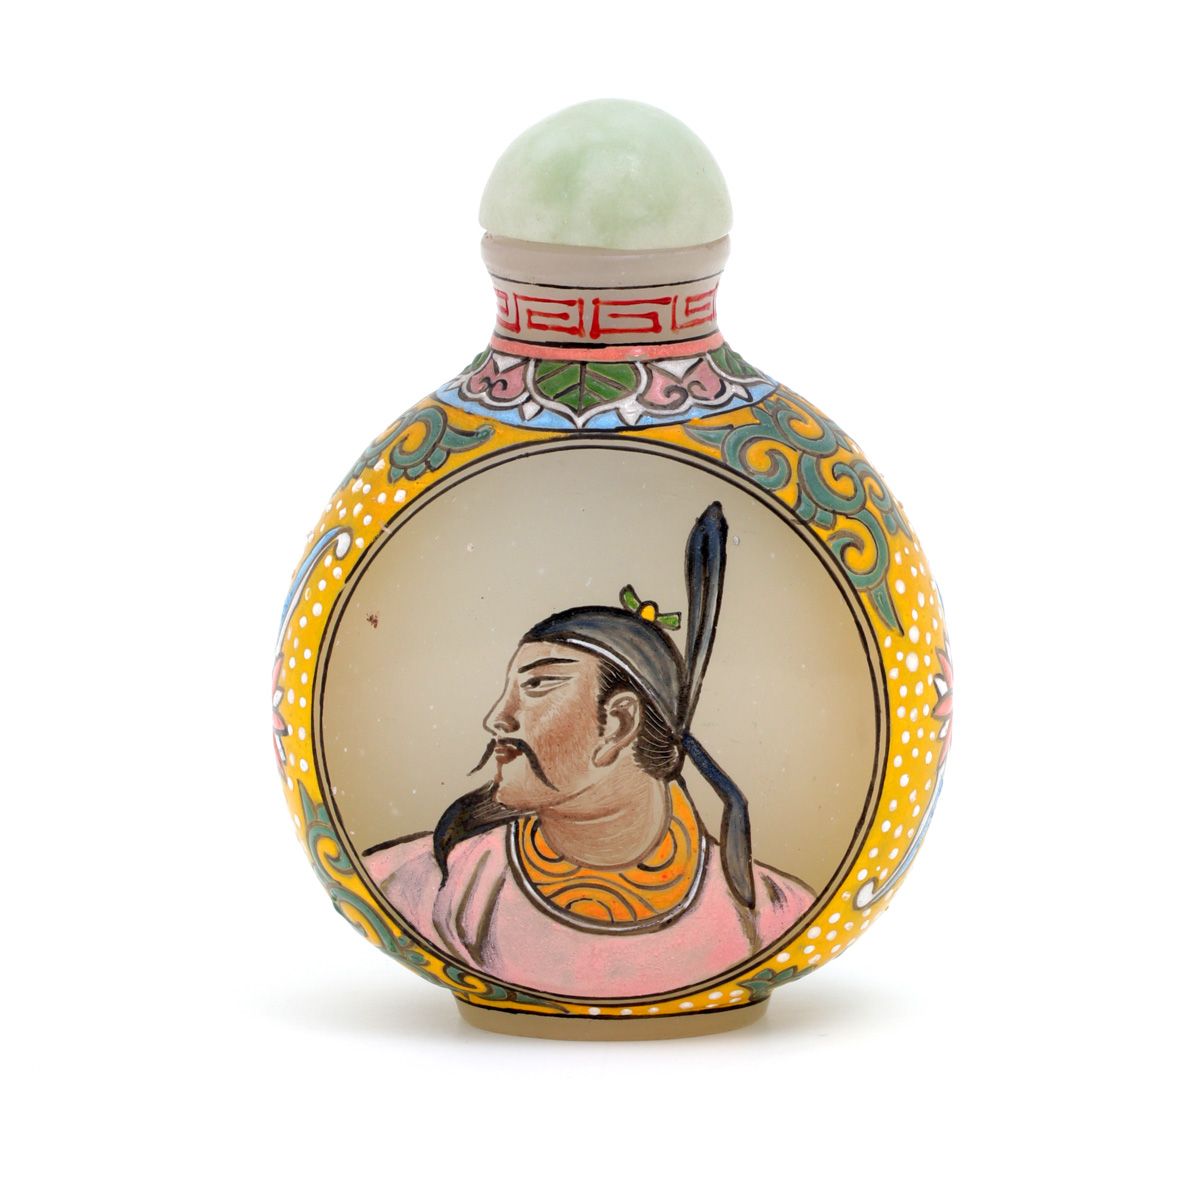 A SNUFF-BOTTLE A SNUFF-BOTTLE Chinese glass, polychrome decoration depicting bus&hellip;